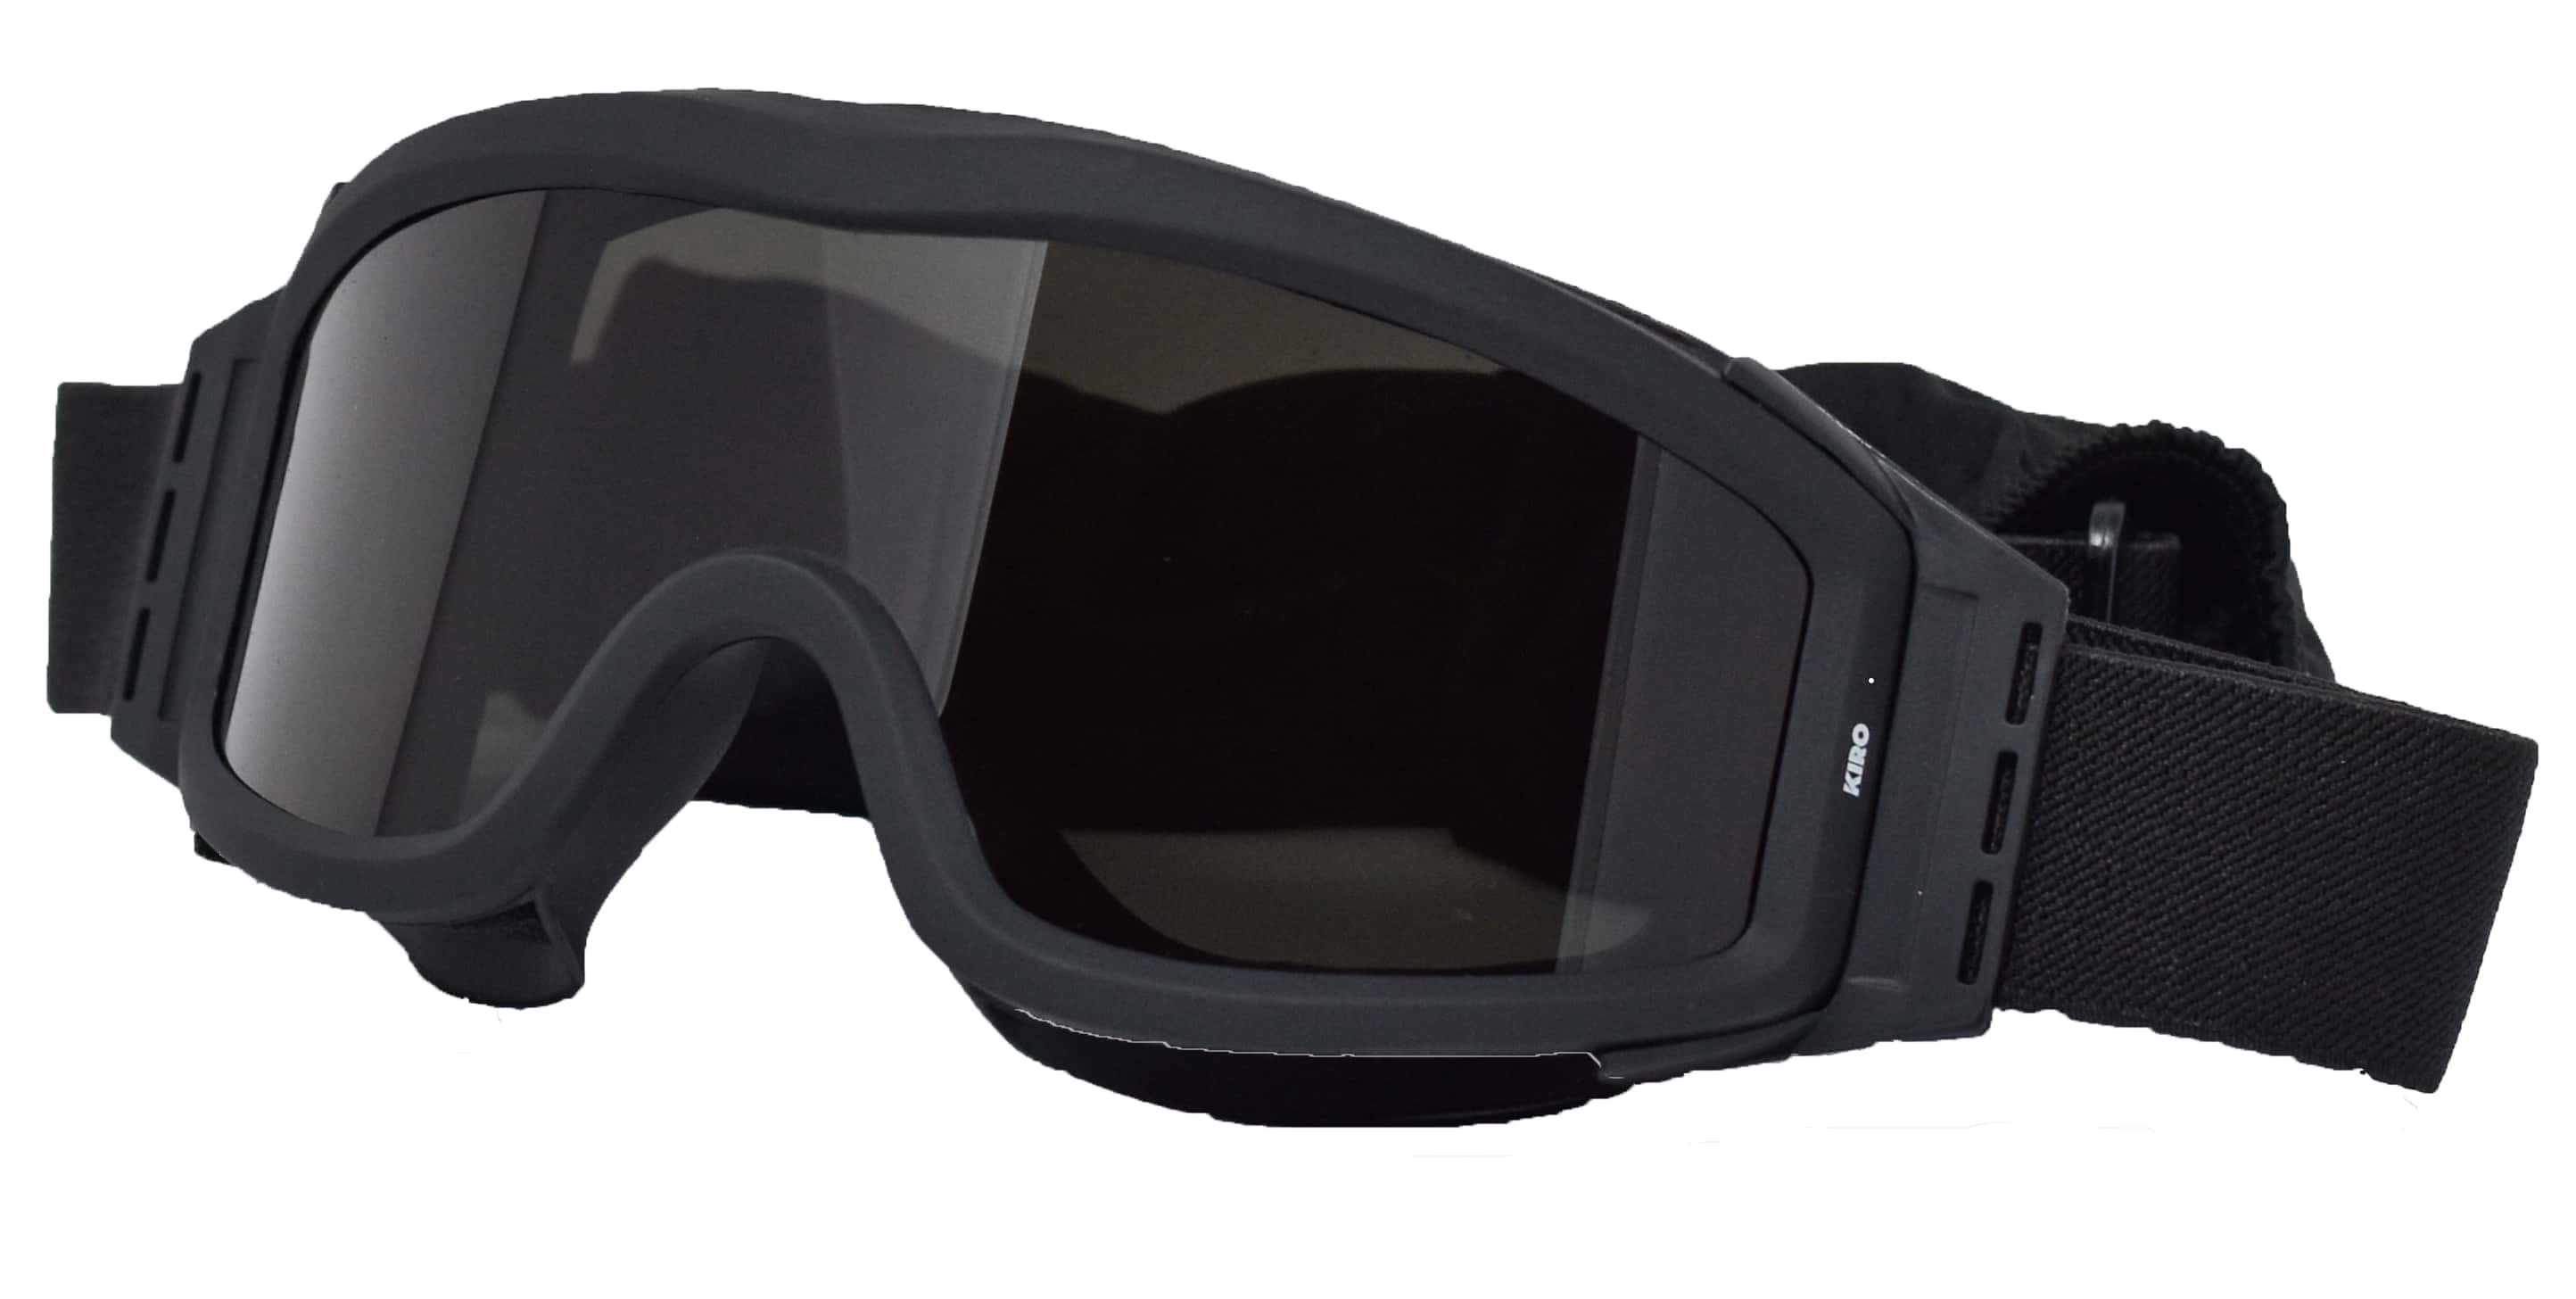 KIRO Arcus - Ballistic Rated Tactical Goggles for Extreme sports and SF ...